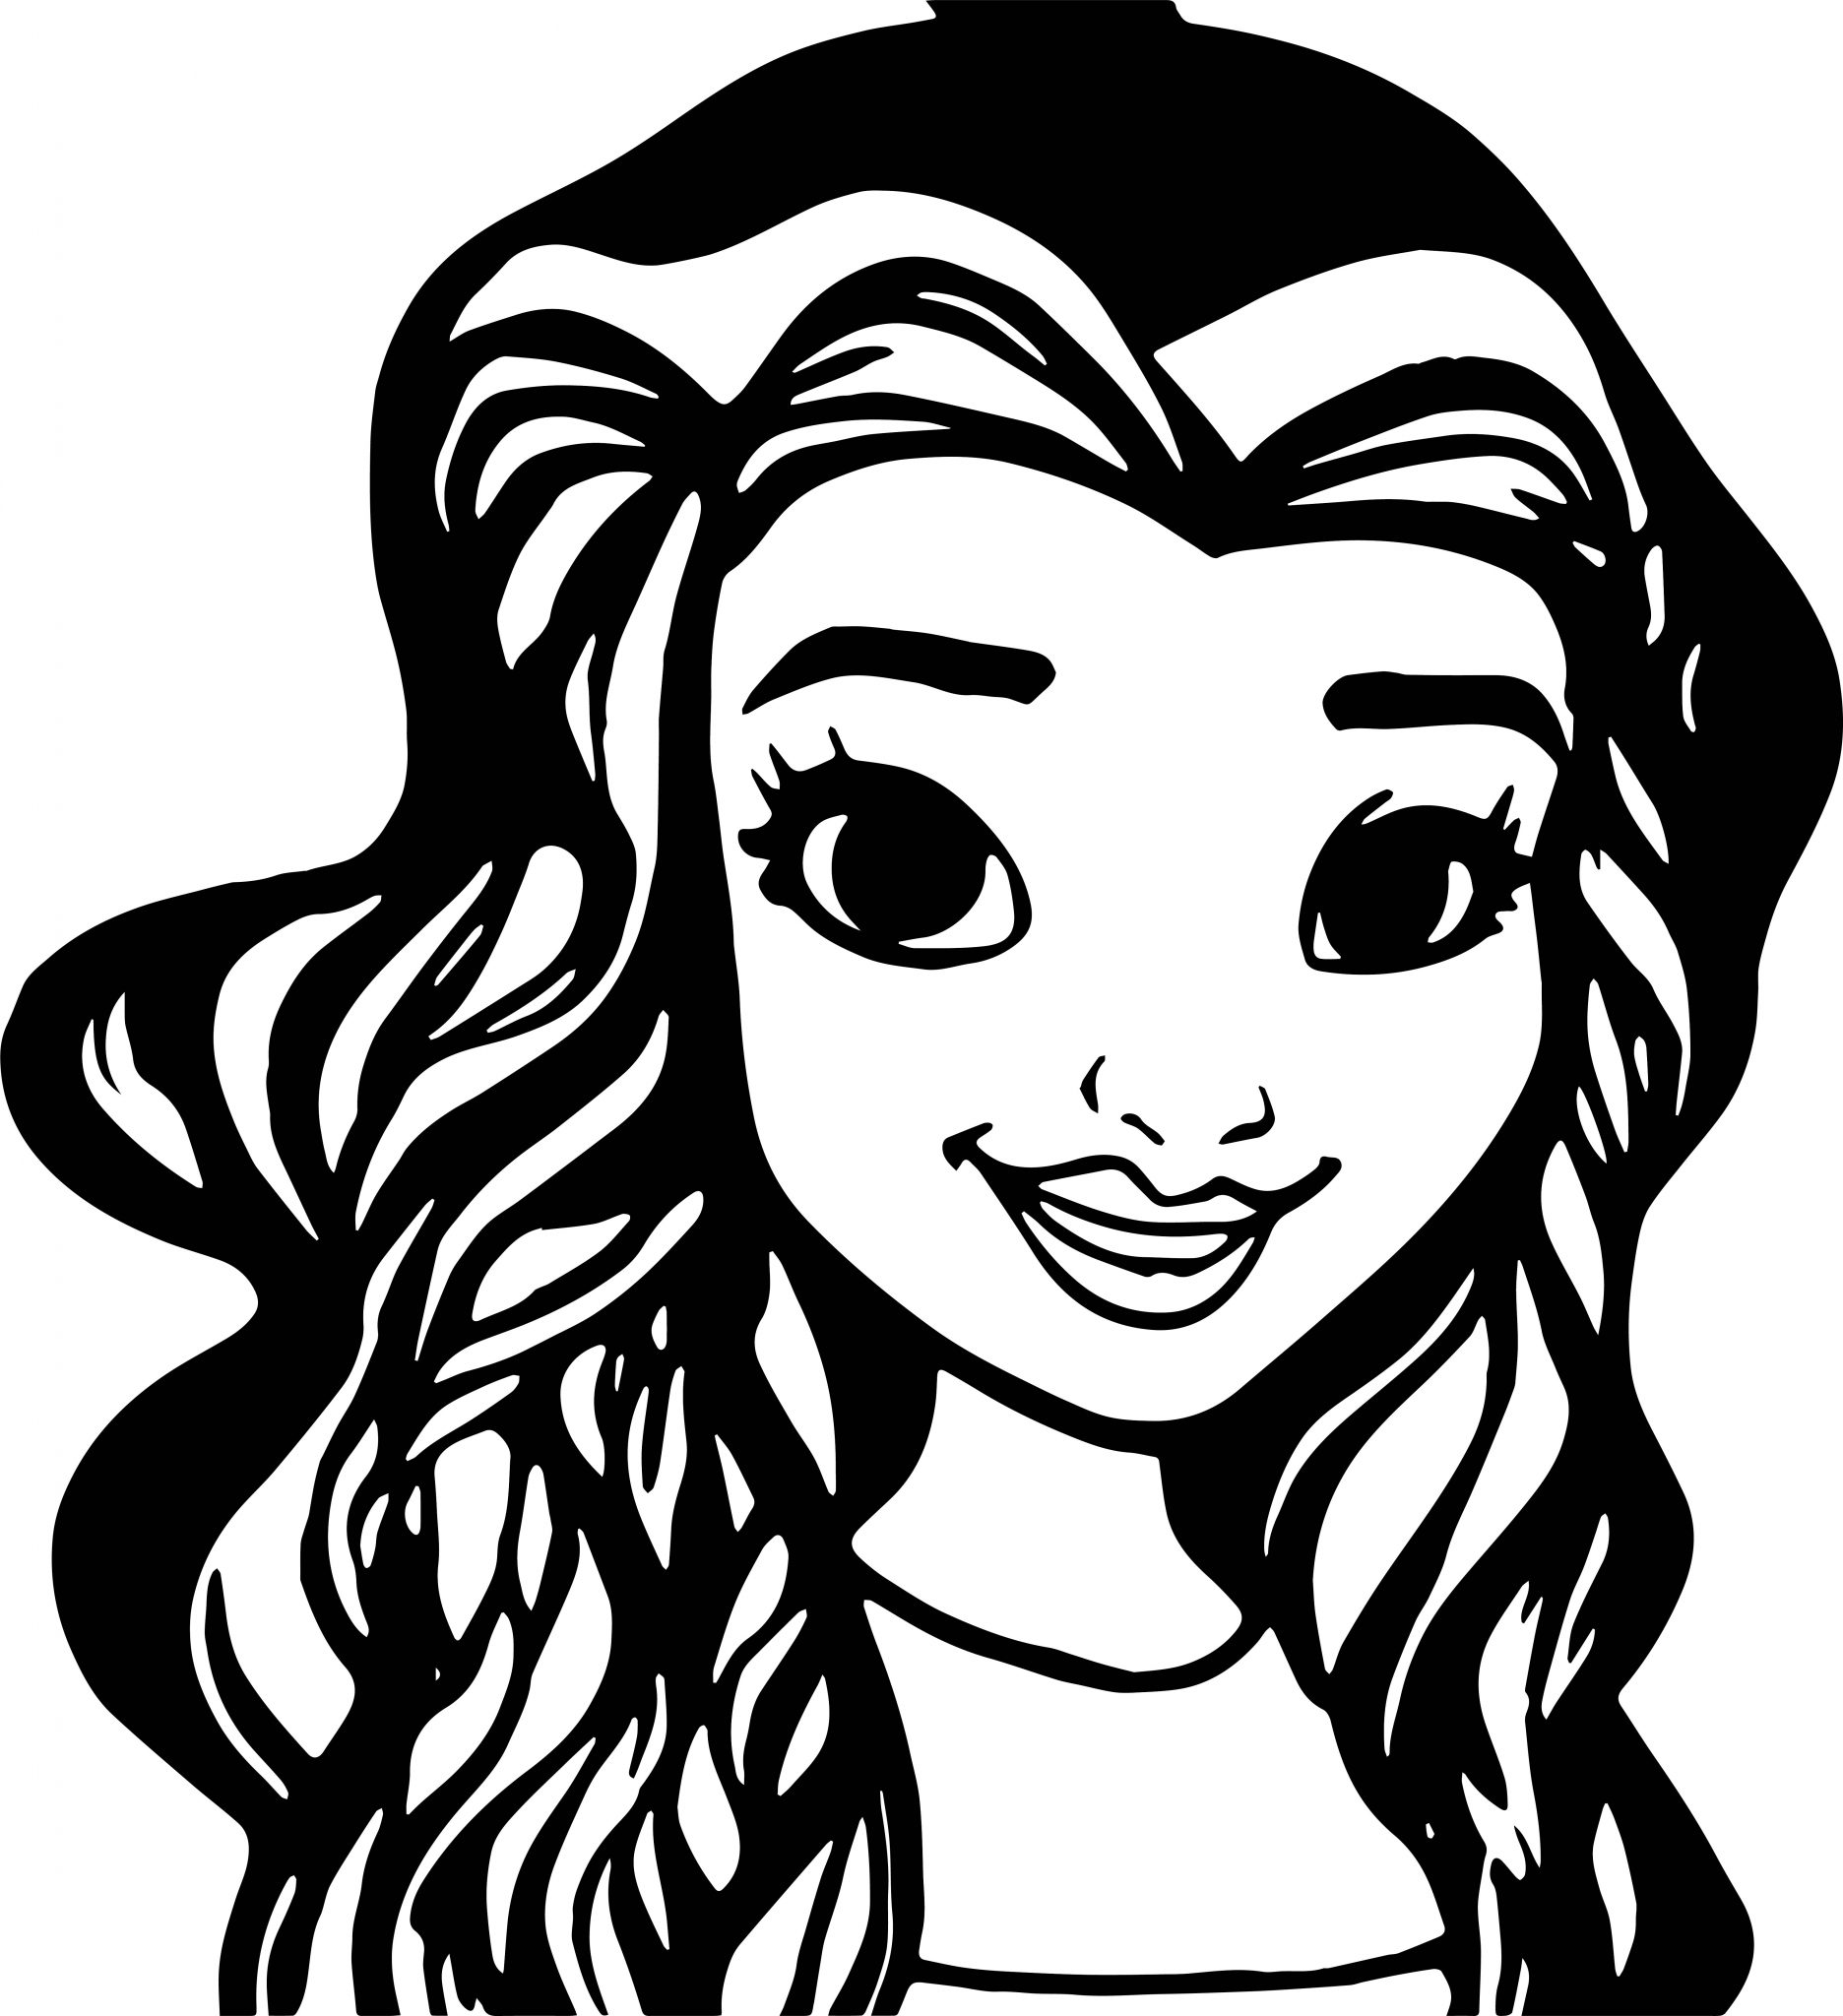 Disney Style Girl Coloring Page - Wecoloringpage.com